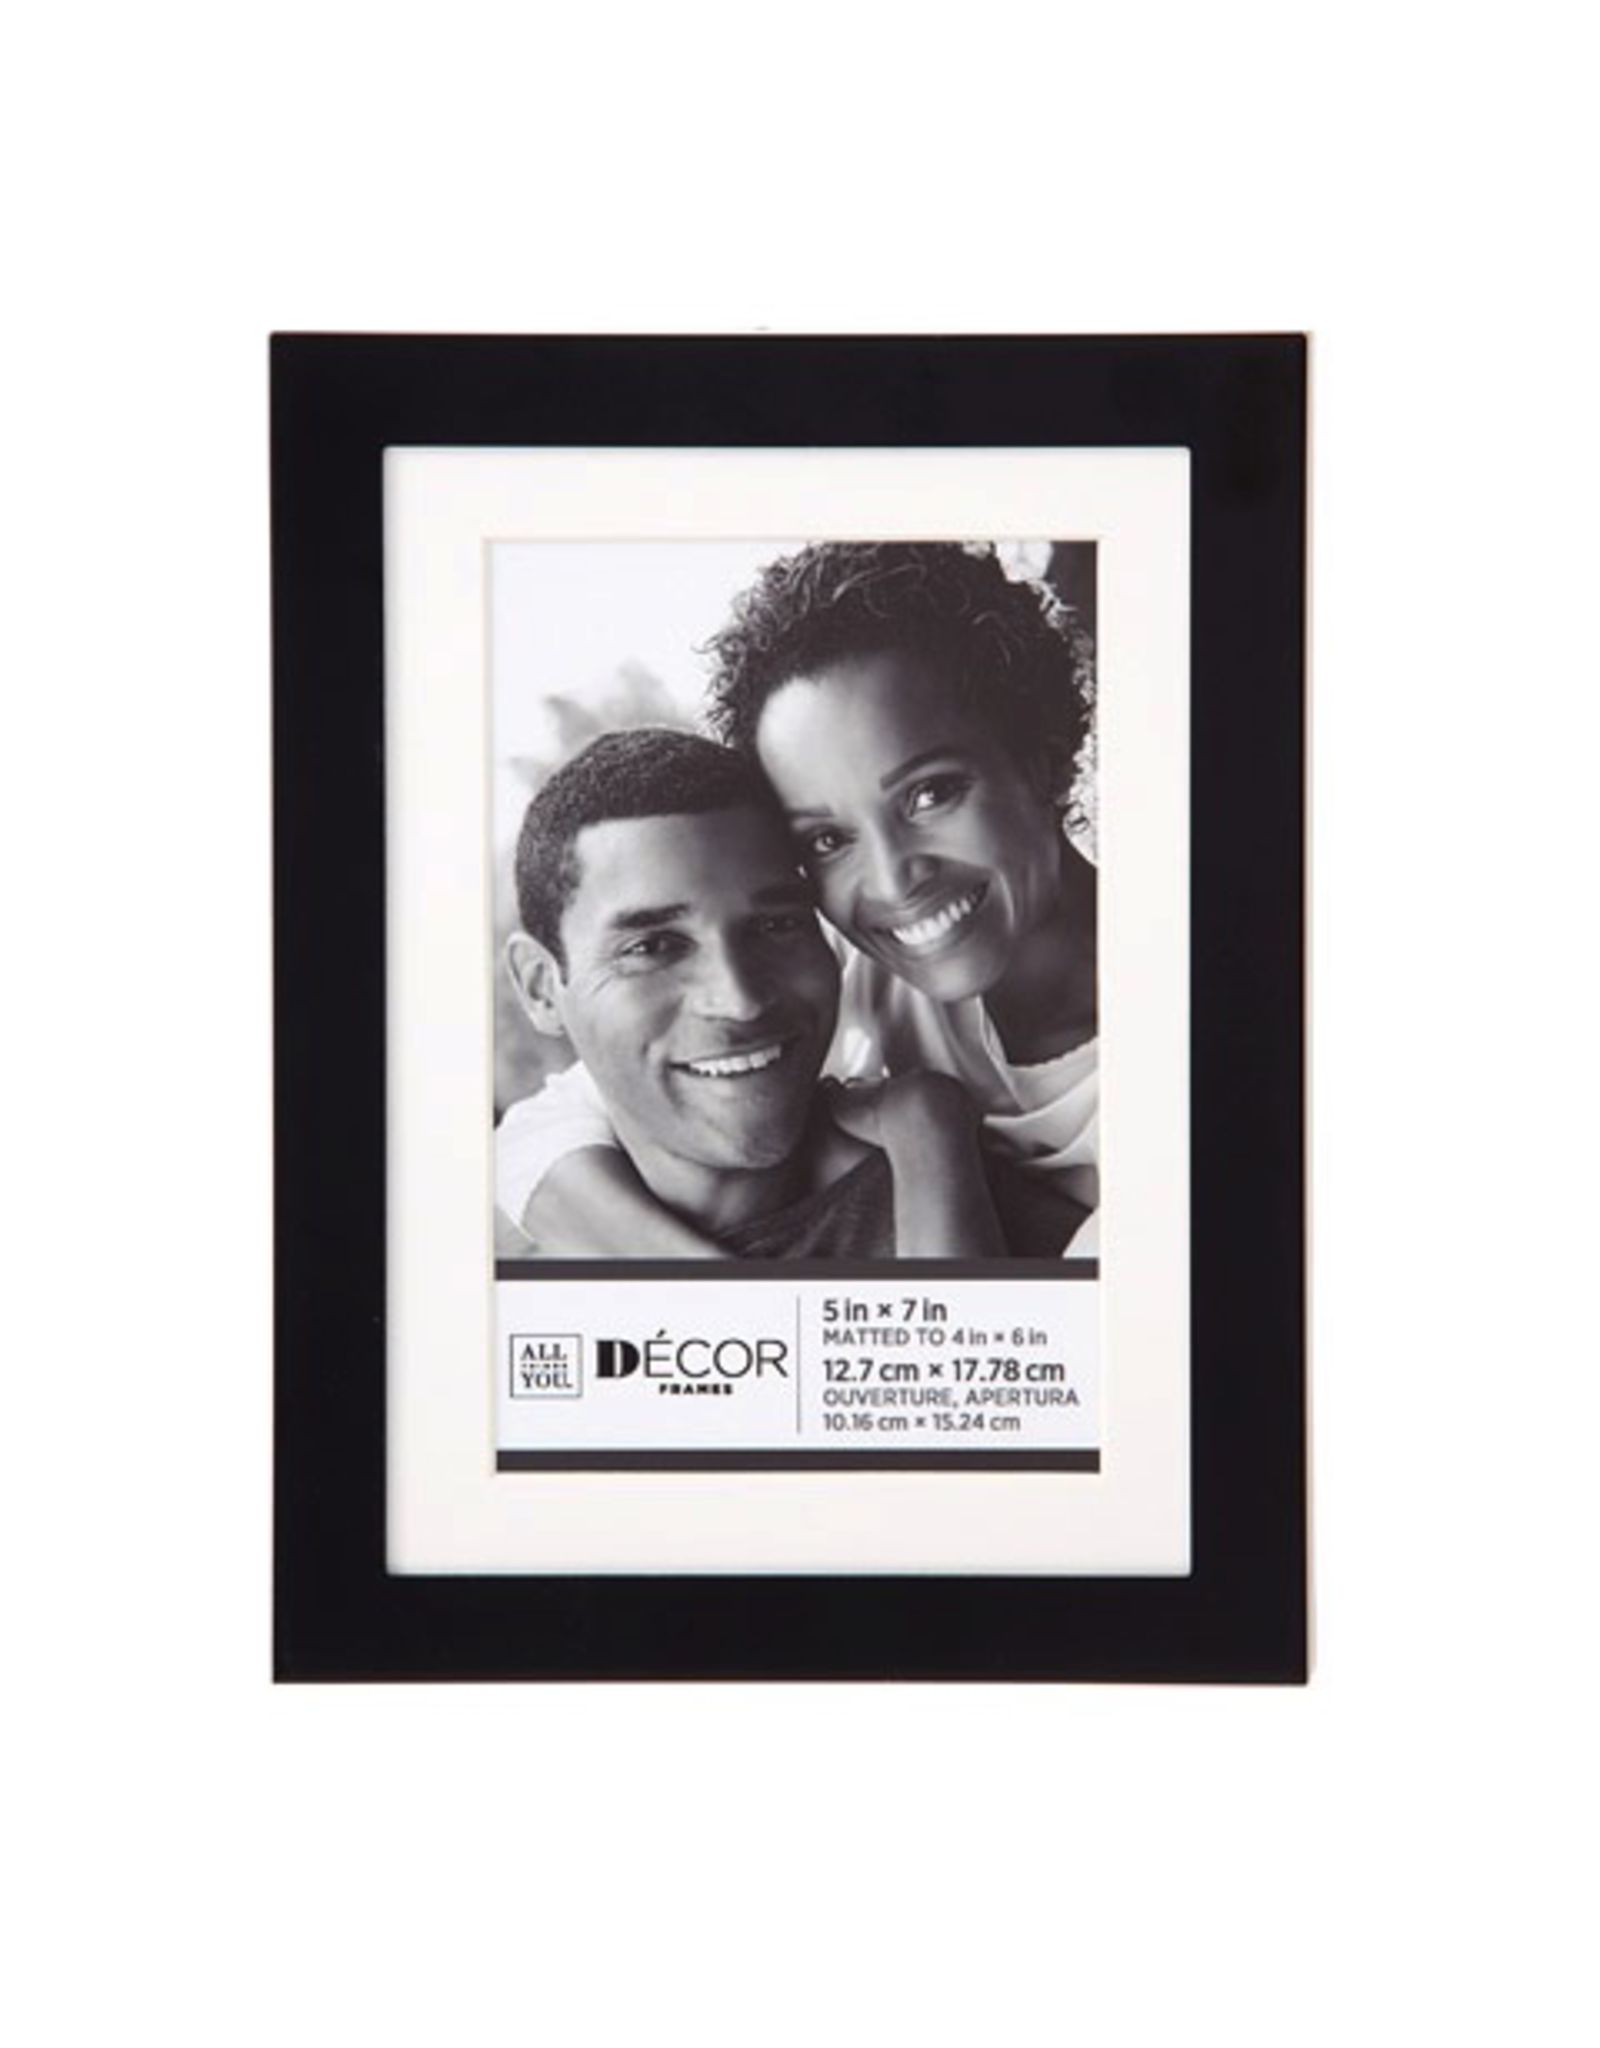 Darice Simple Black Picture Frame 5x7 Matted to 4x6